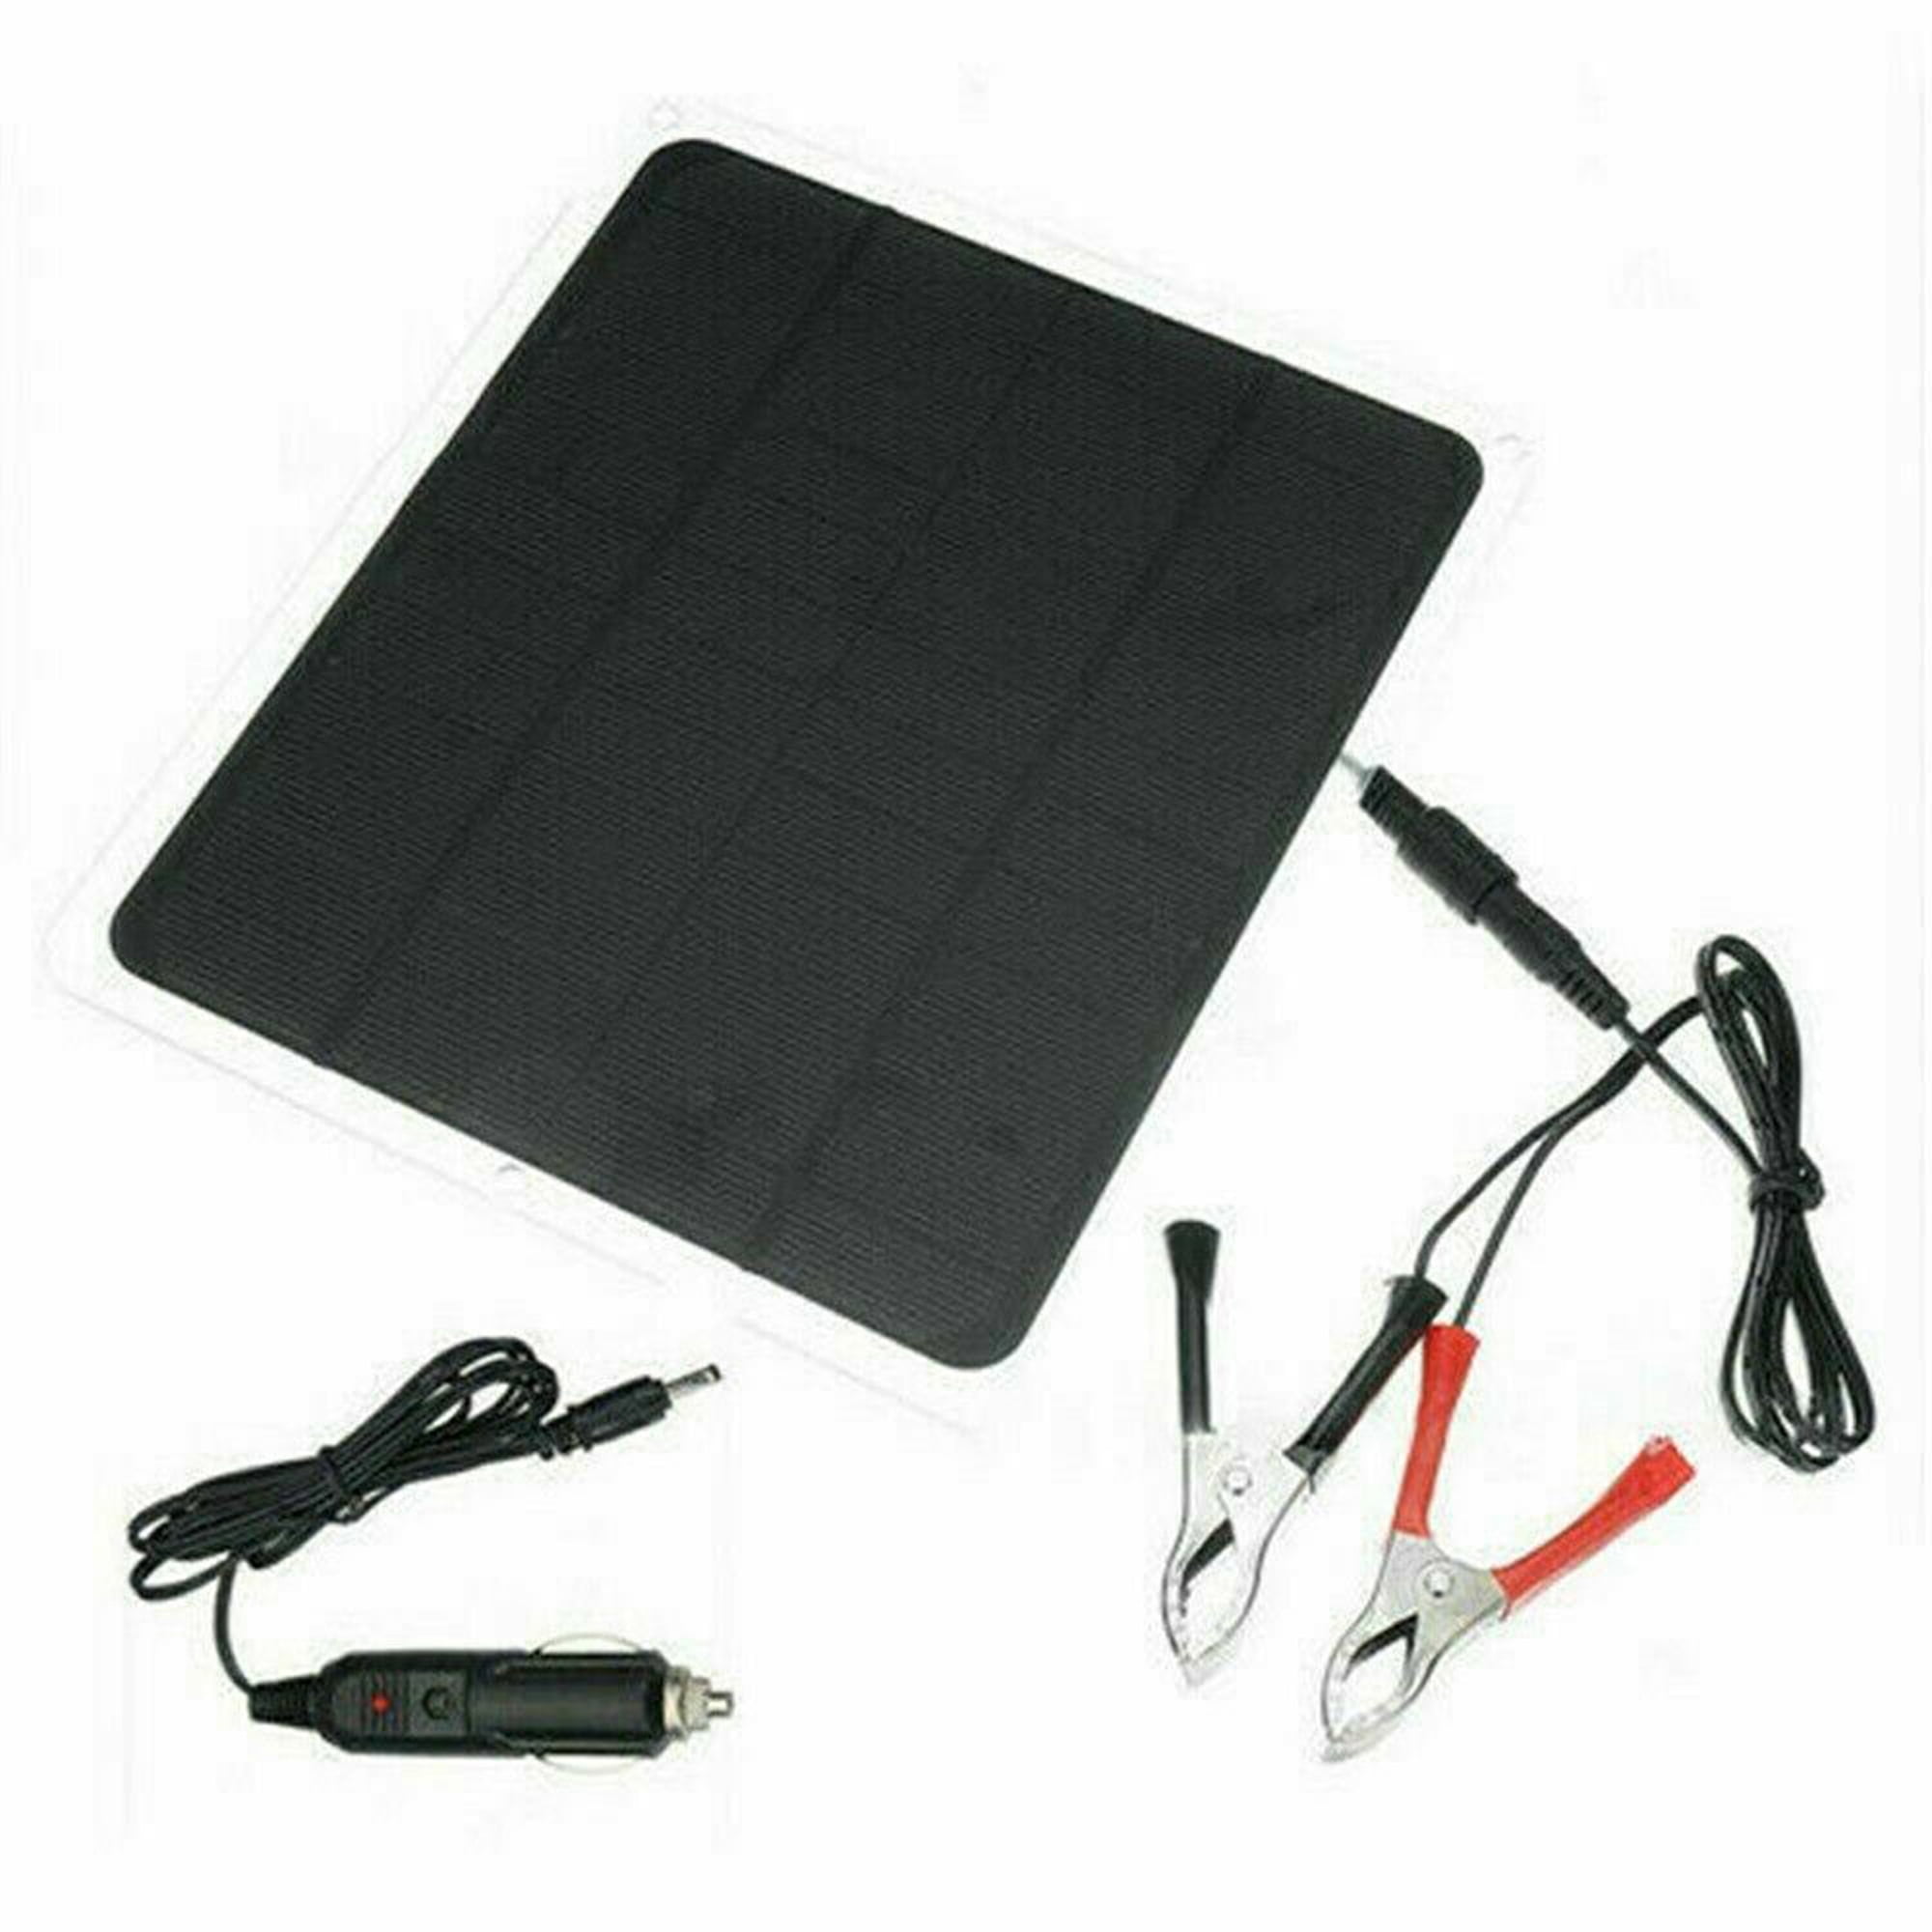 SAE Cable Kits Built-in MPPT Charge Controller 3-Stages Charging 20 Watts Solar Panel Trickle Charger with Adjustable Mount Brackets Sun Energise Waterproof 12V 20W Solar Battery Charger Pro